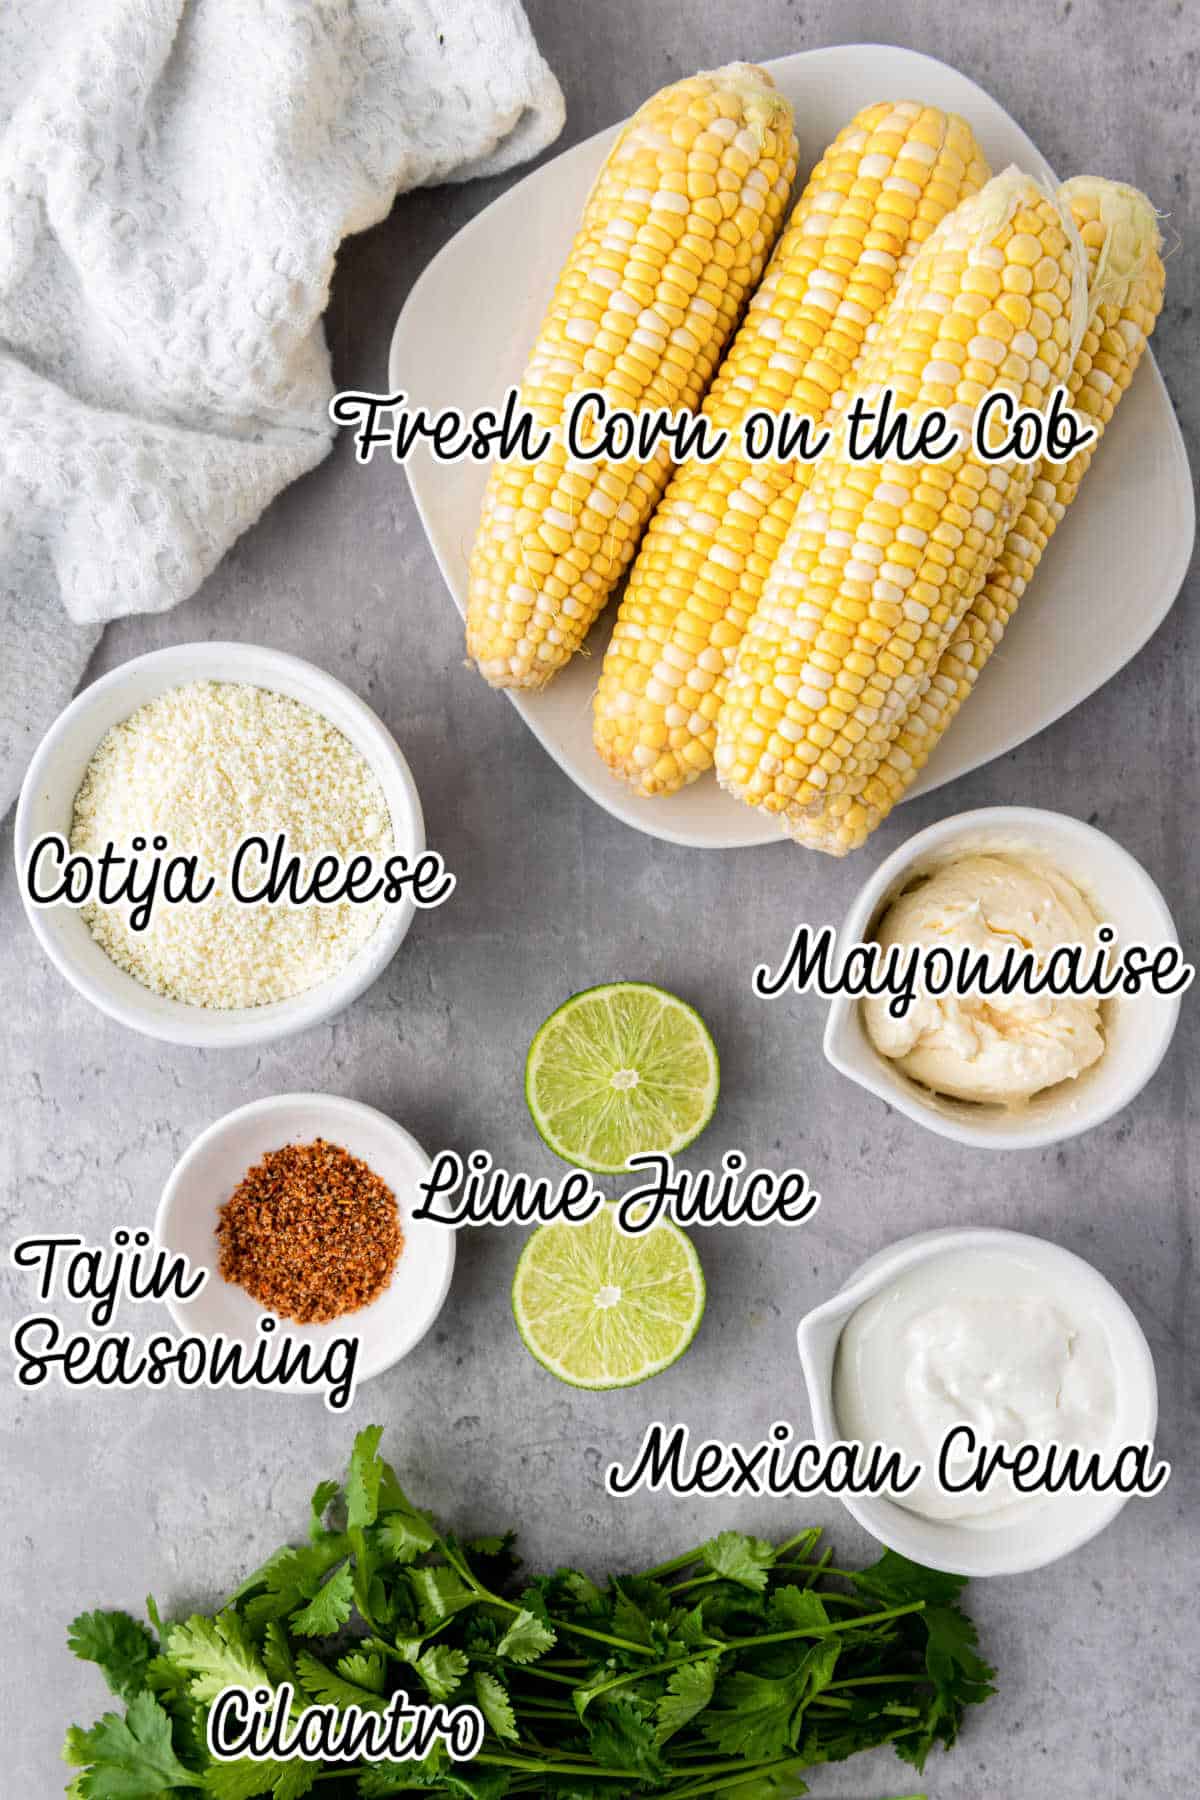 Ingredients laid out, as would be needed for a Mexican Street Corn Recipe, with text overlay.